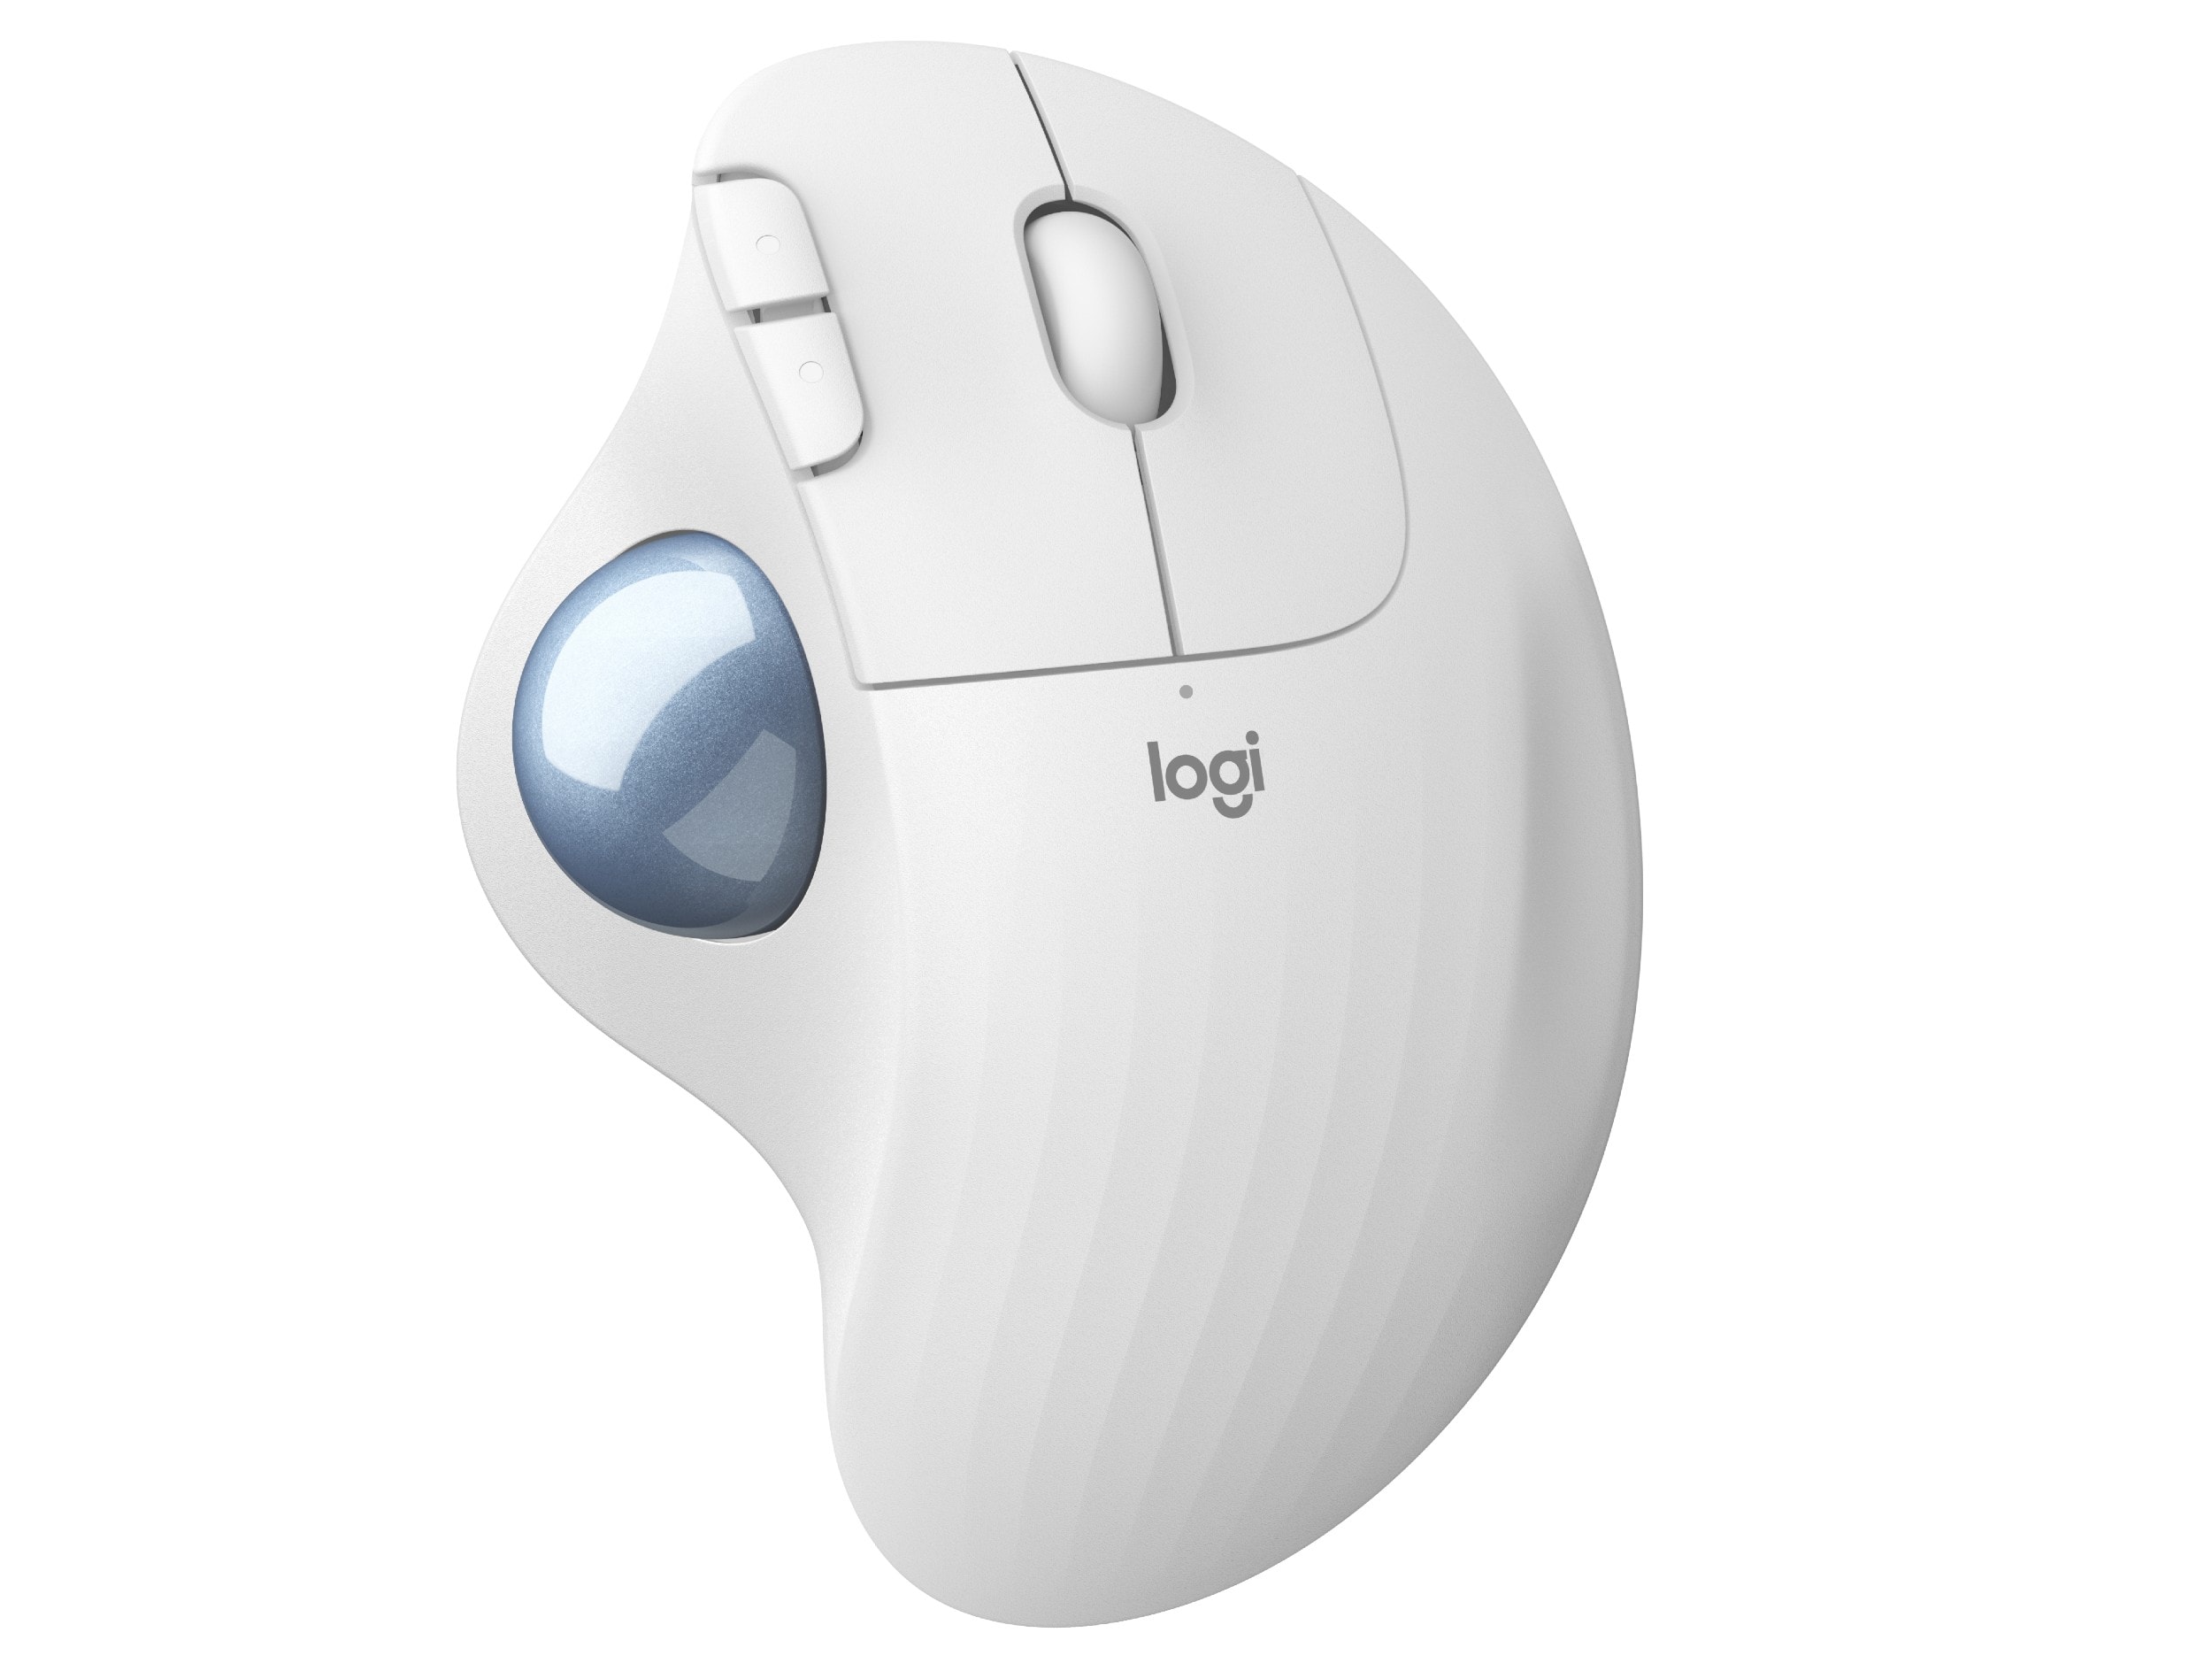 Logitech Ergo M575 wireless trackball review: It comes in off-white, too.